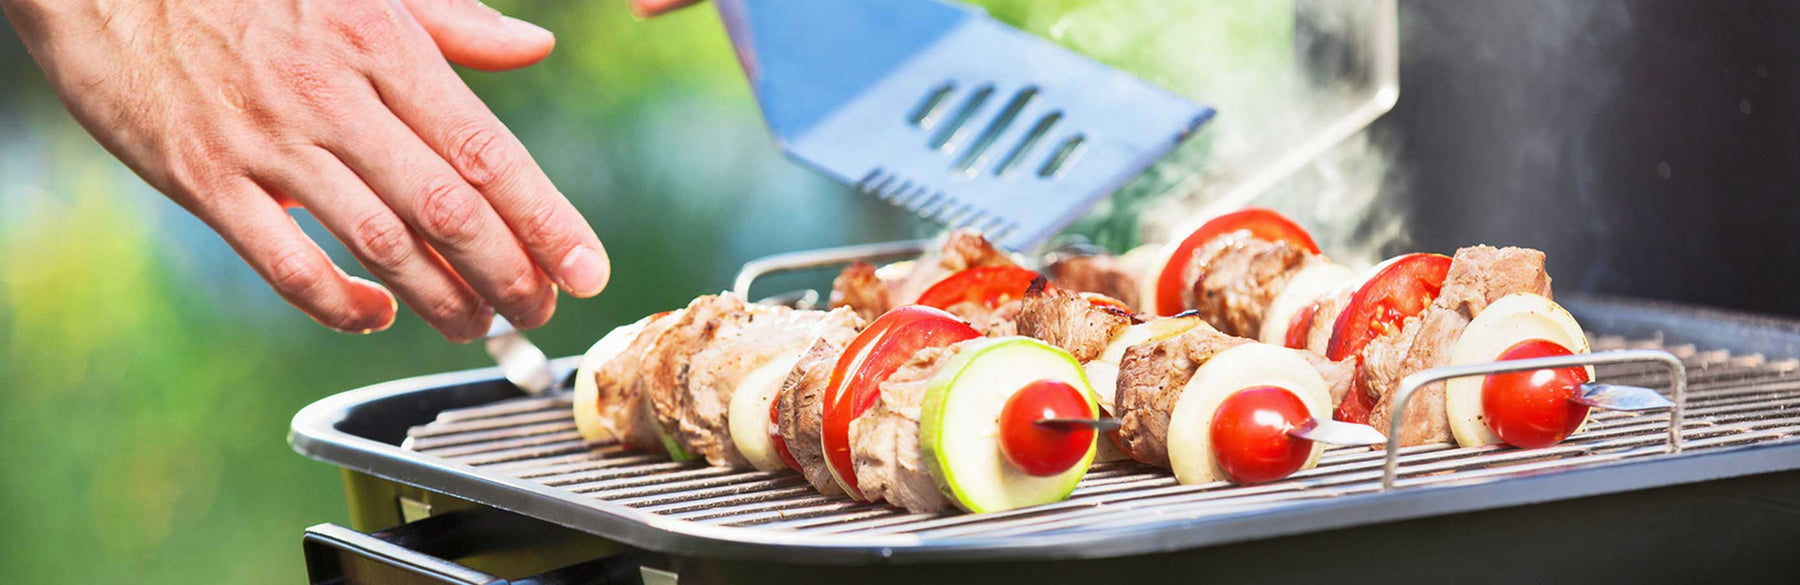 How To Become A Boss On The Grill, Part IV - Great Backyard Place